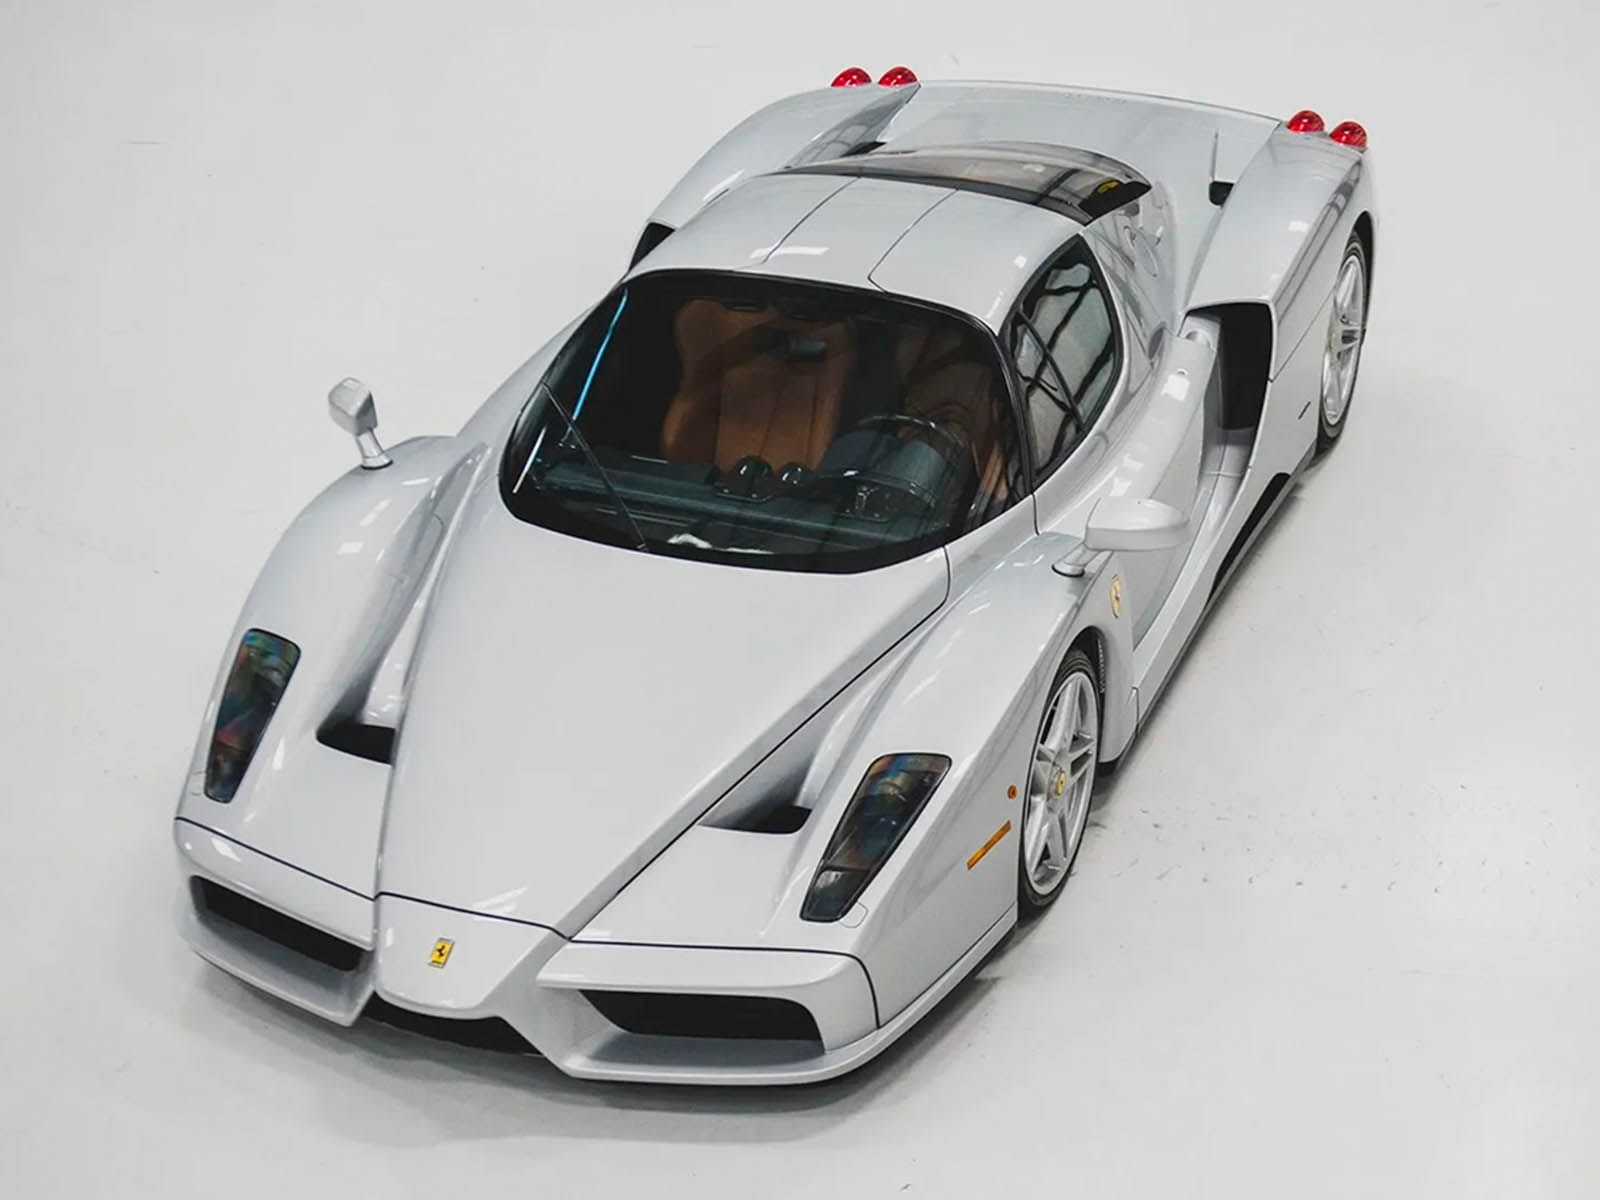 A very exclusive 2003 Ferrari Enzo goes up for auction